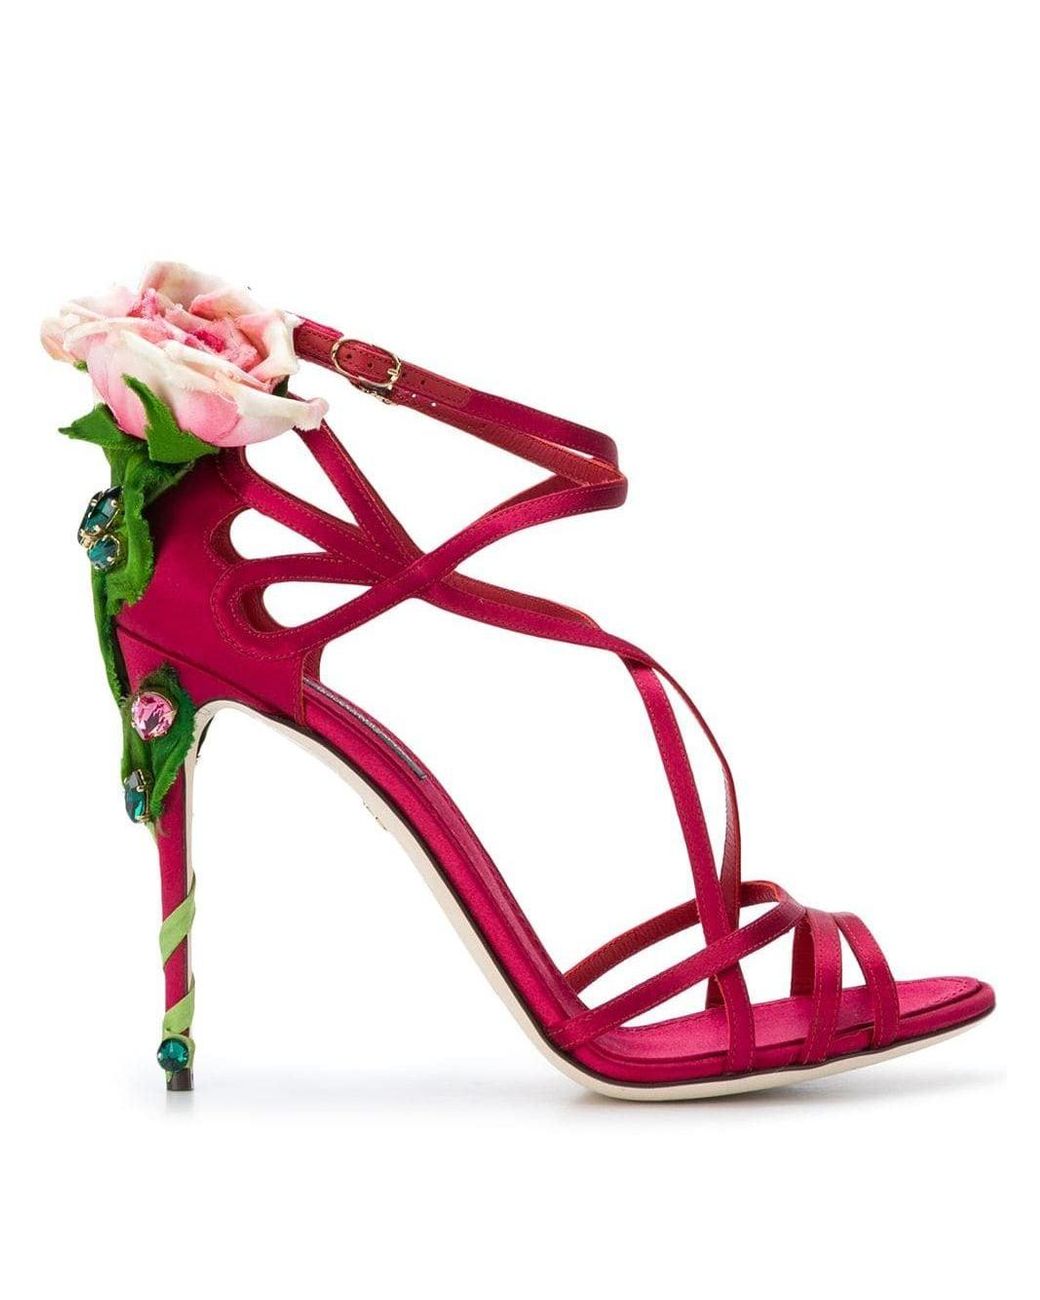 Dolce & Gabbana Satin Keira Rose Jewelled Sandals in Red - Save 60% - Lyst